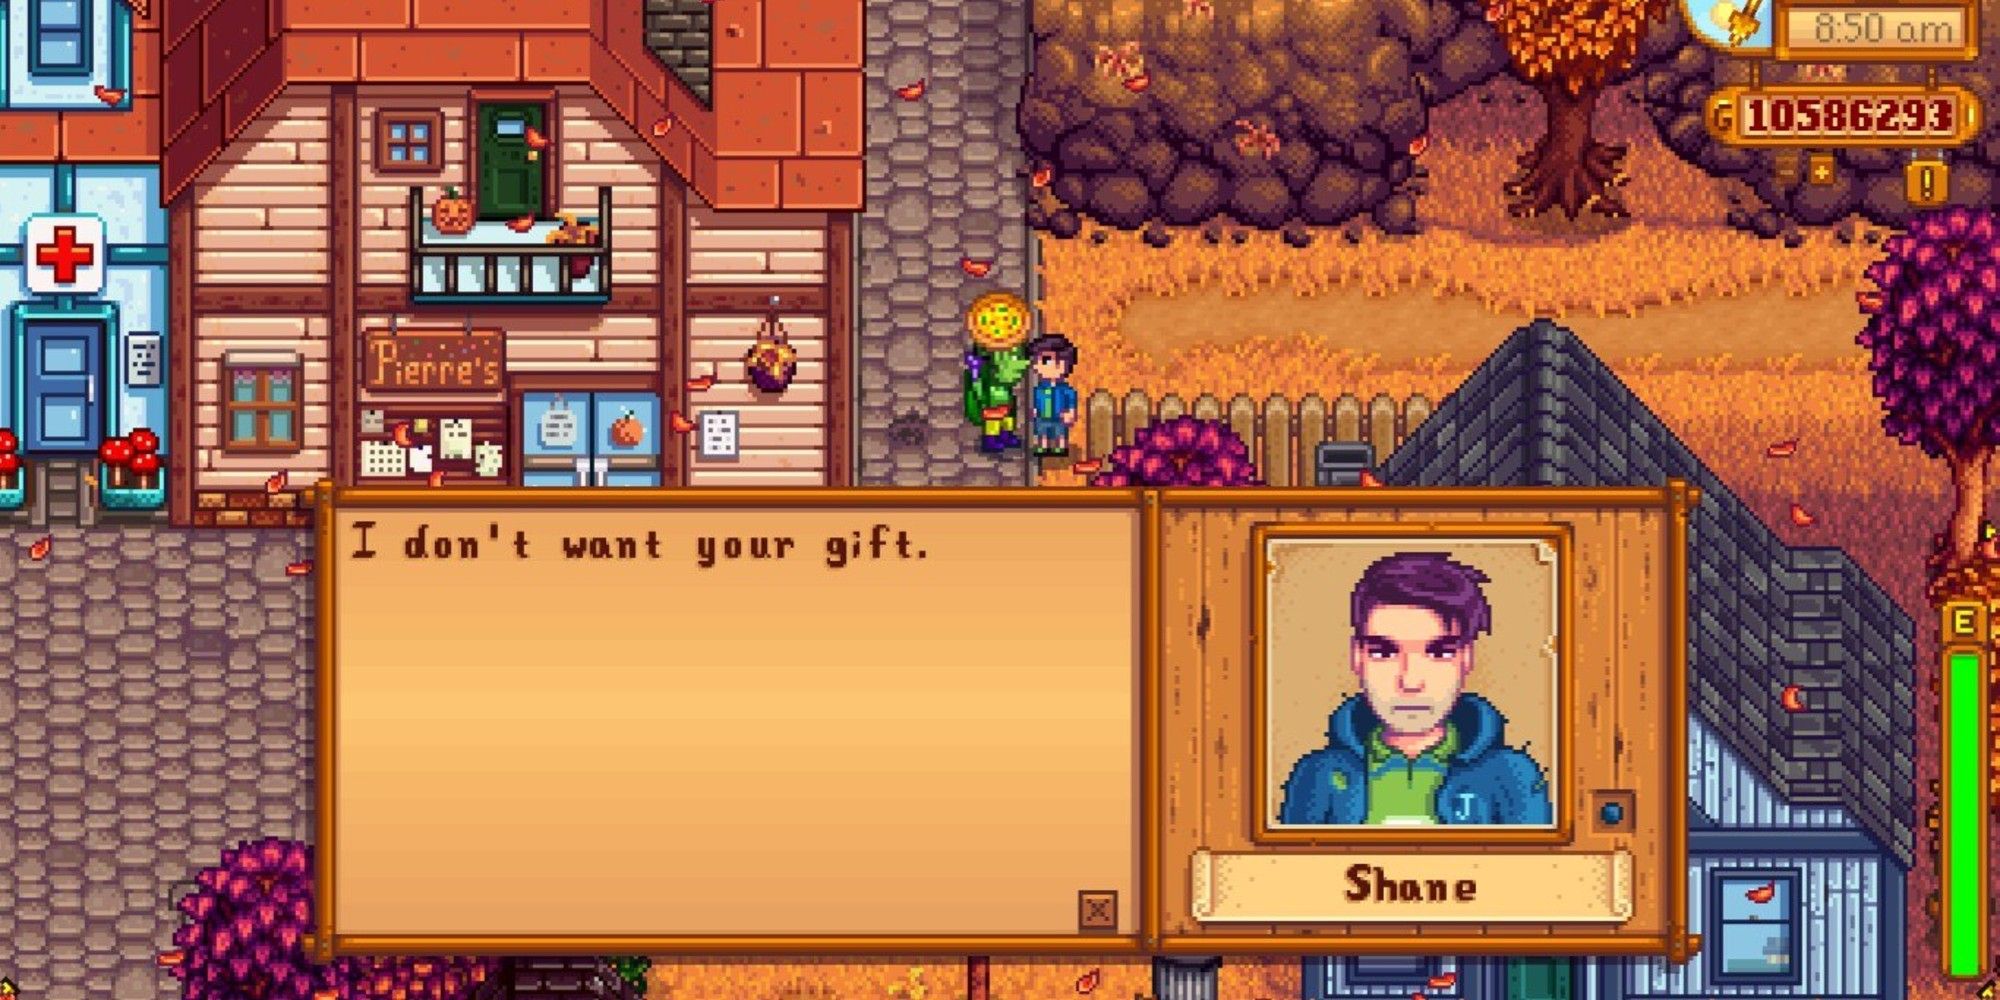 dialogue after player divorces shane in stardew valley